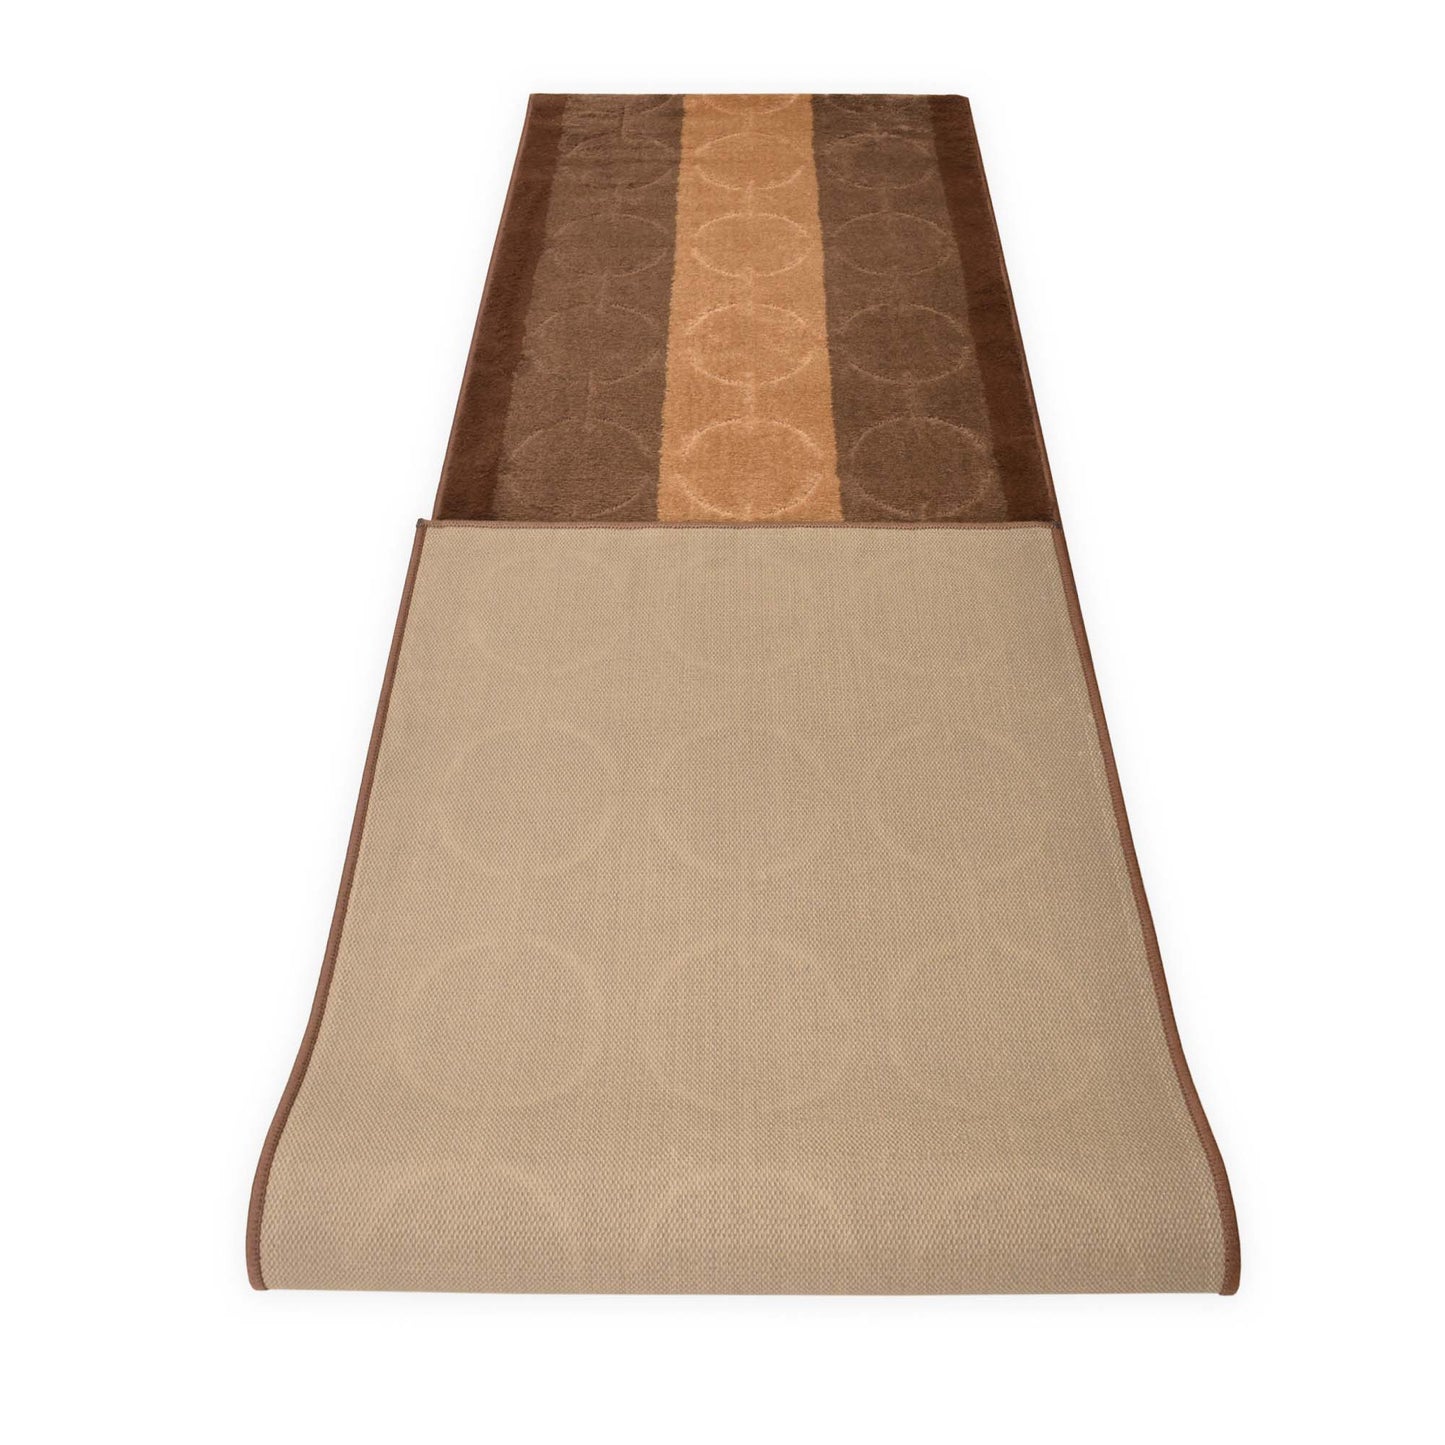 Machine Washable Custom Size Runner Rug Platin Circles Abstract Brown Skid Resistant Runner Rug  Customize Up to 50 Feet and 36 Inch Width Runner Rug